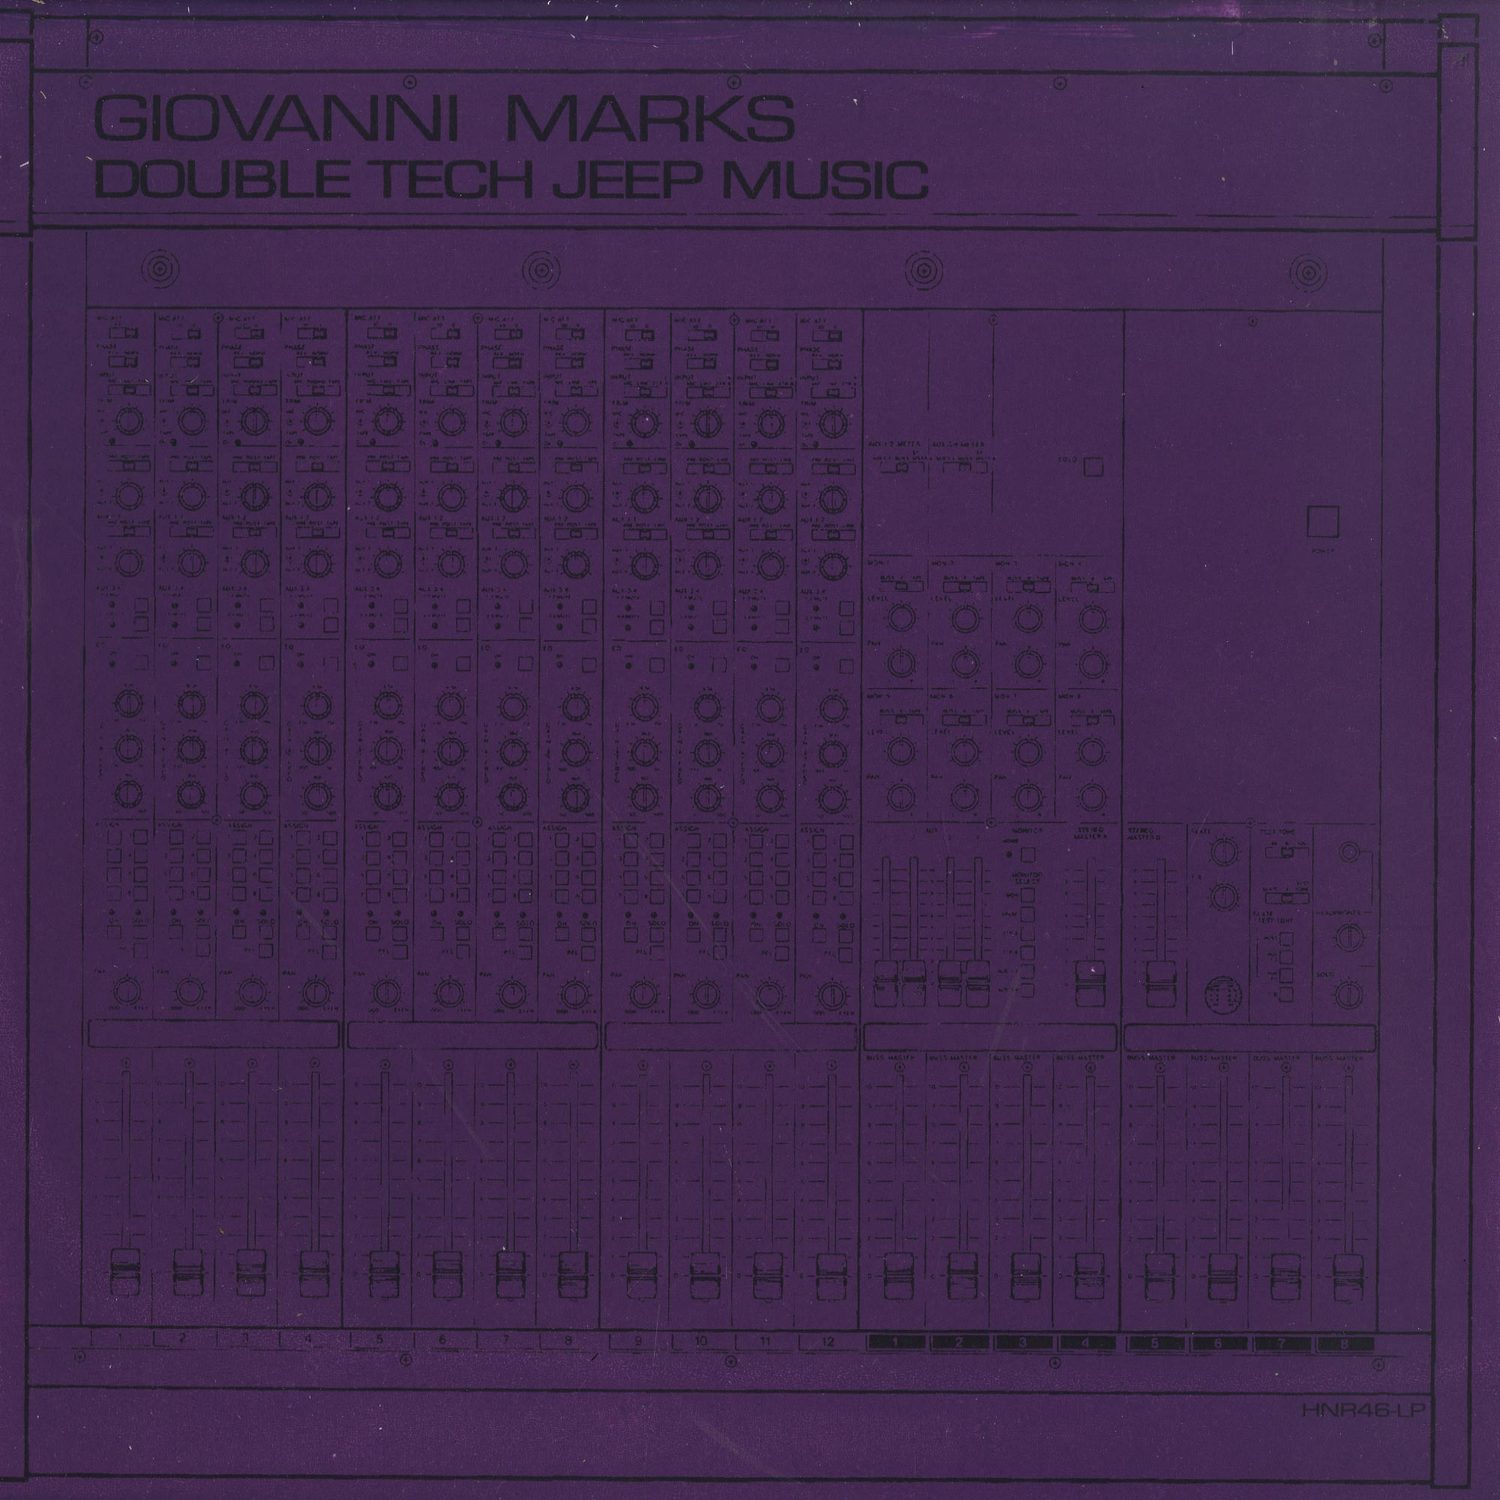 Giovanni Marks - DOUBLE TECH JEEP MUSIC 